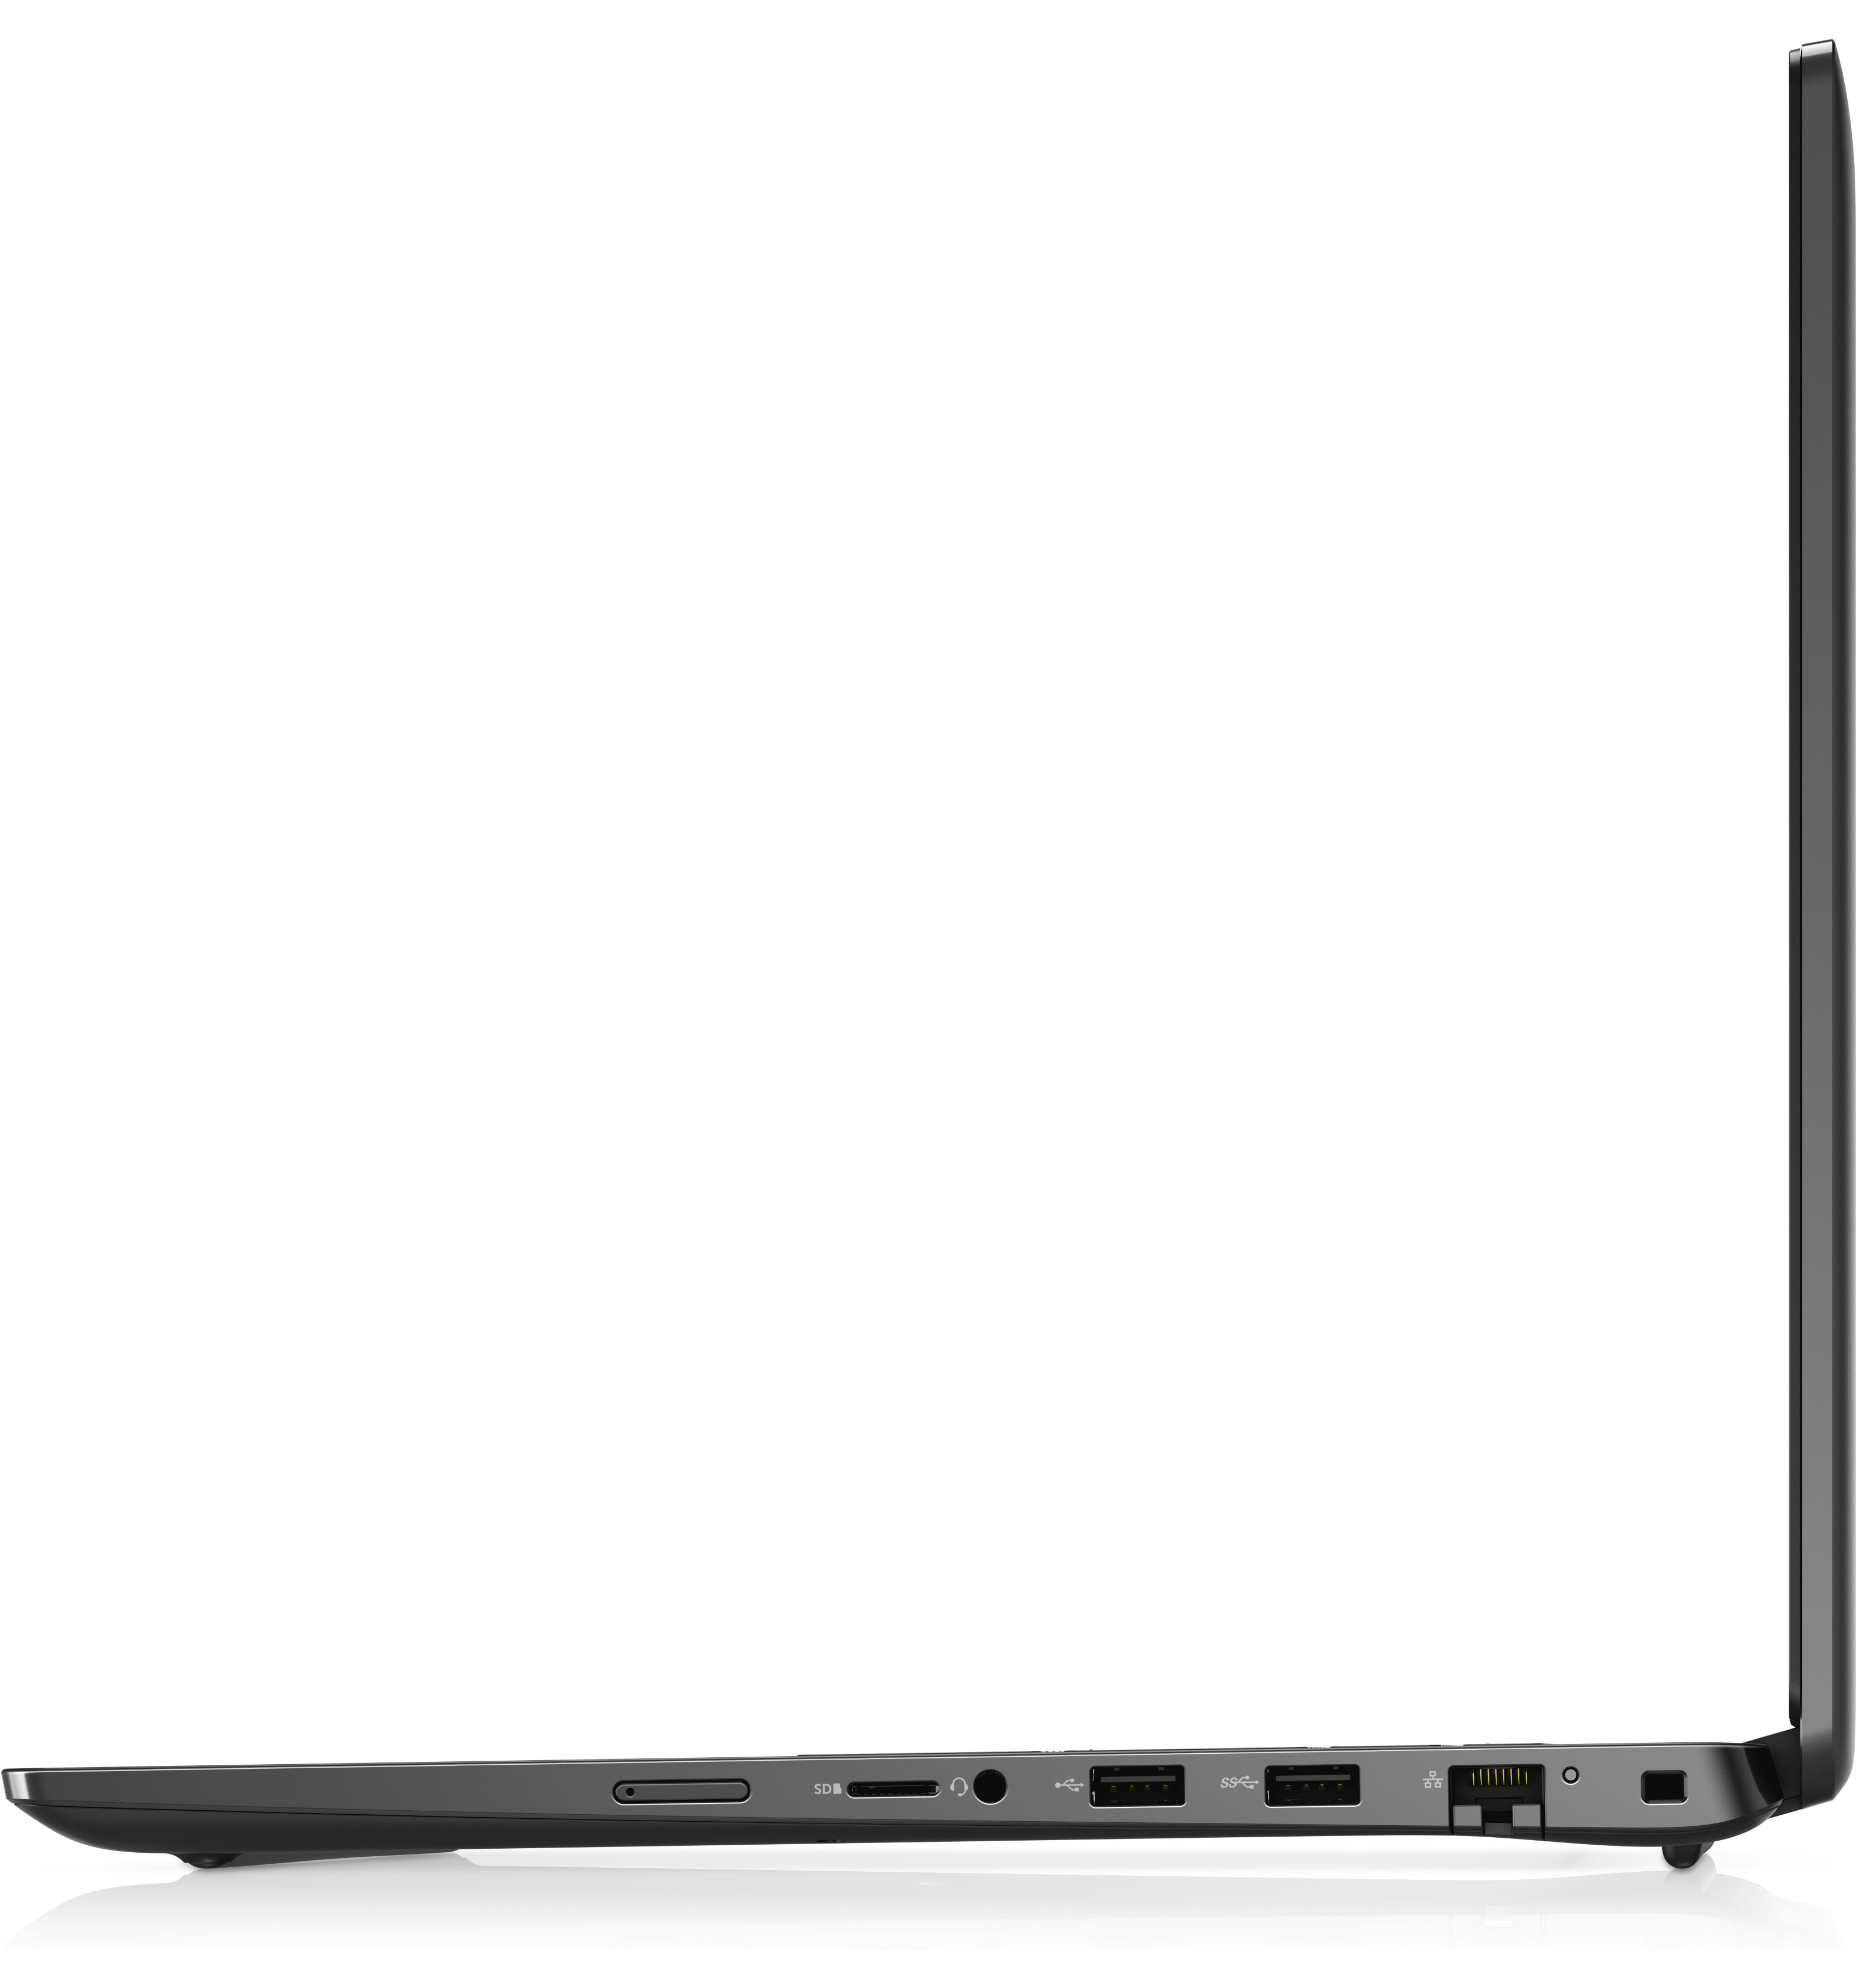 Latitude 15-inch 3520 Business Laptop with Video Conferencing 